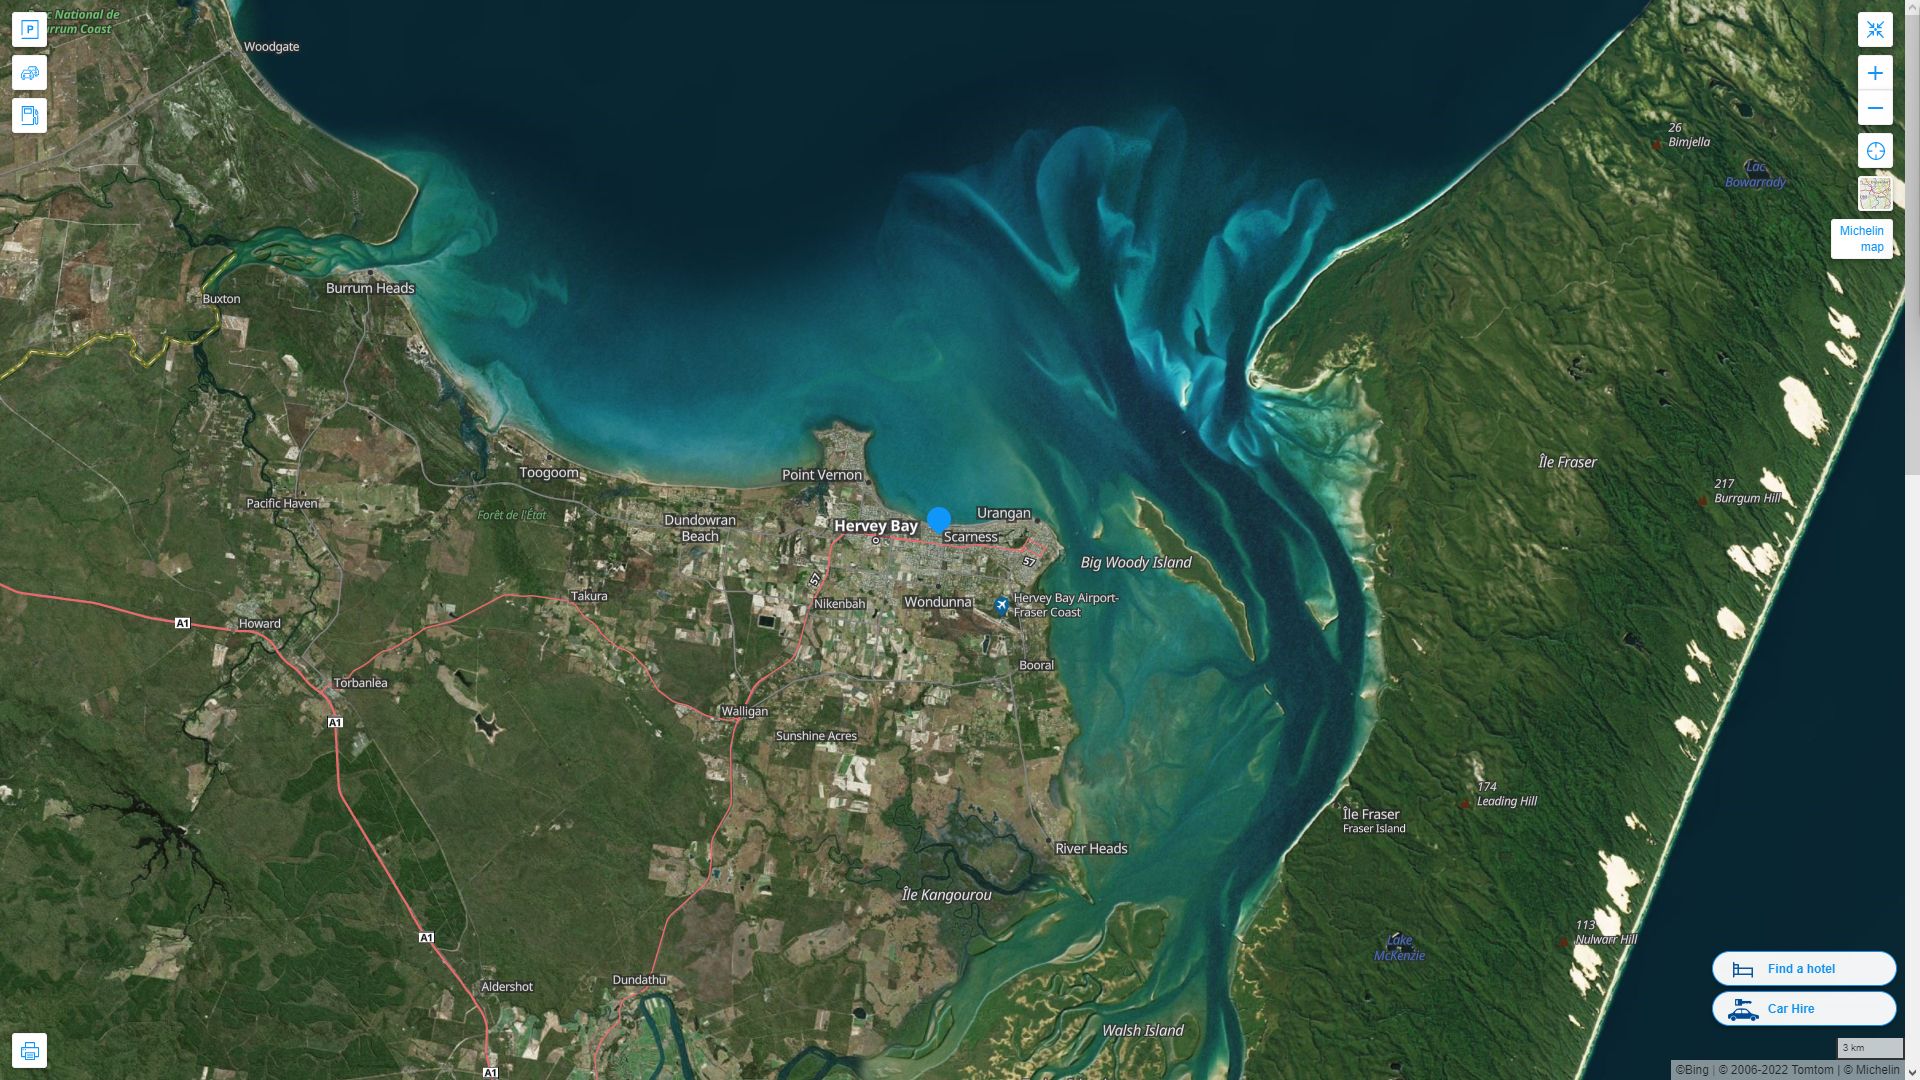 Hervey Bay Highway and Road Map with Satellite View